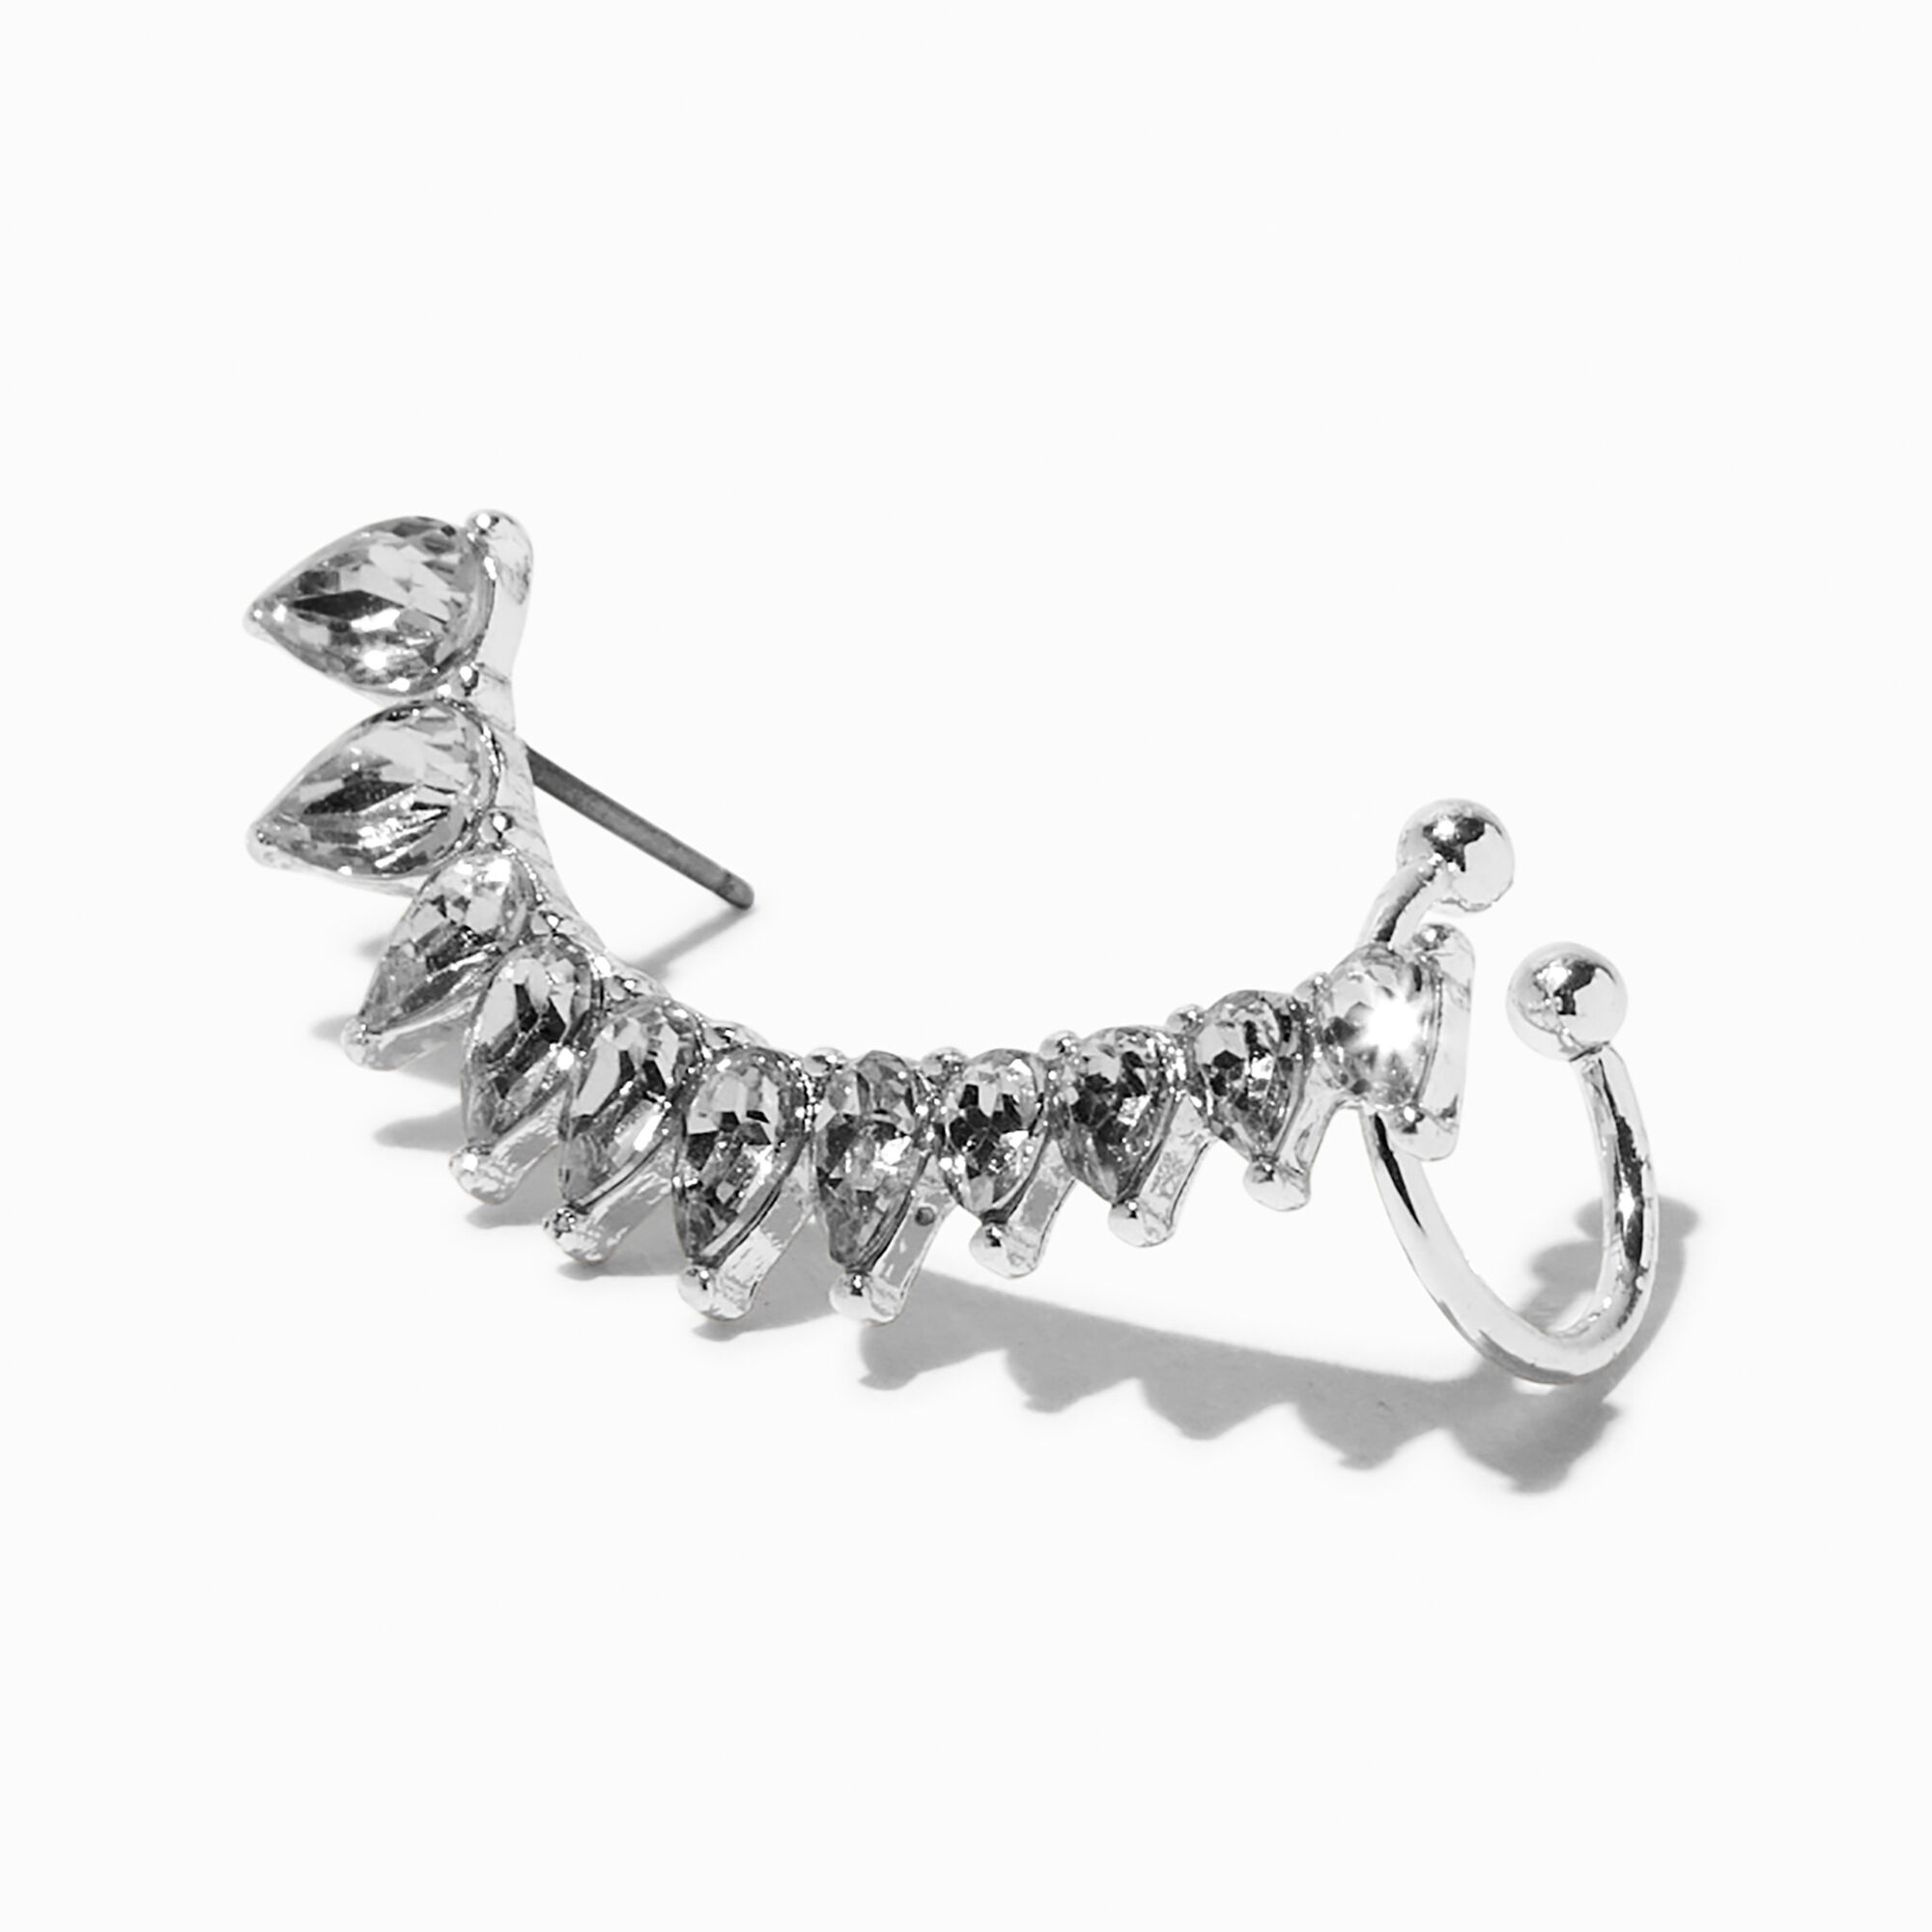 View Claires PearShaped Crystal Crawler Ear Cuff Earring Silver information